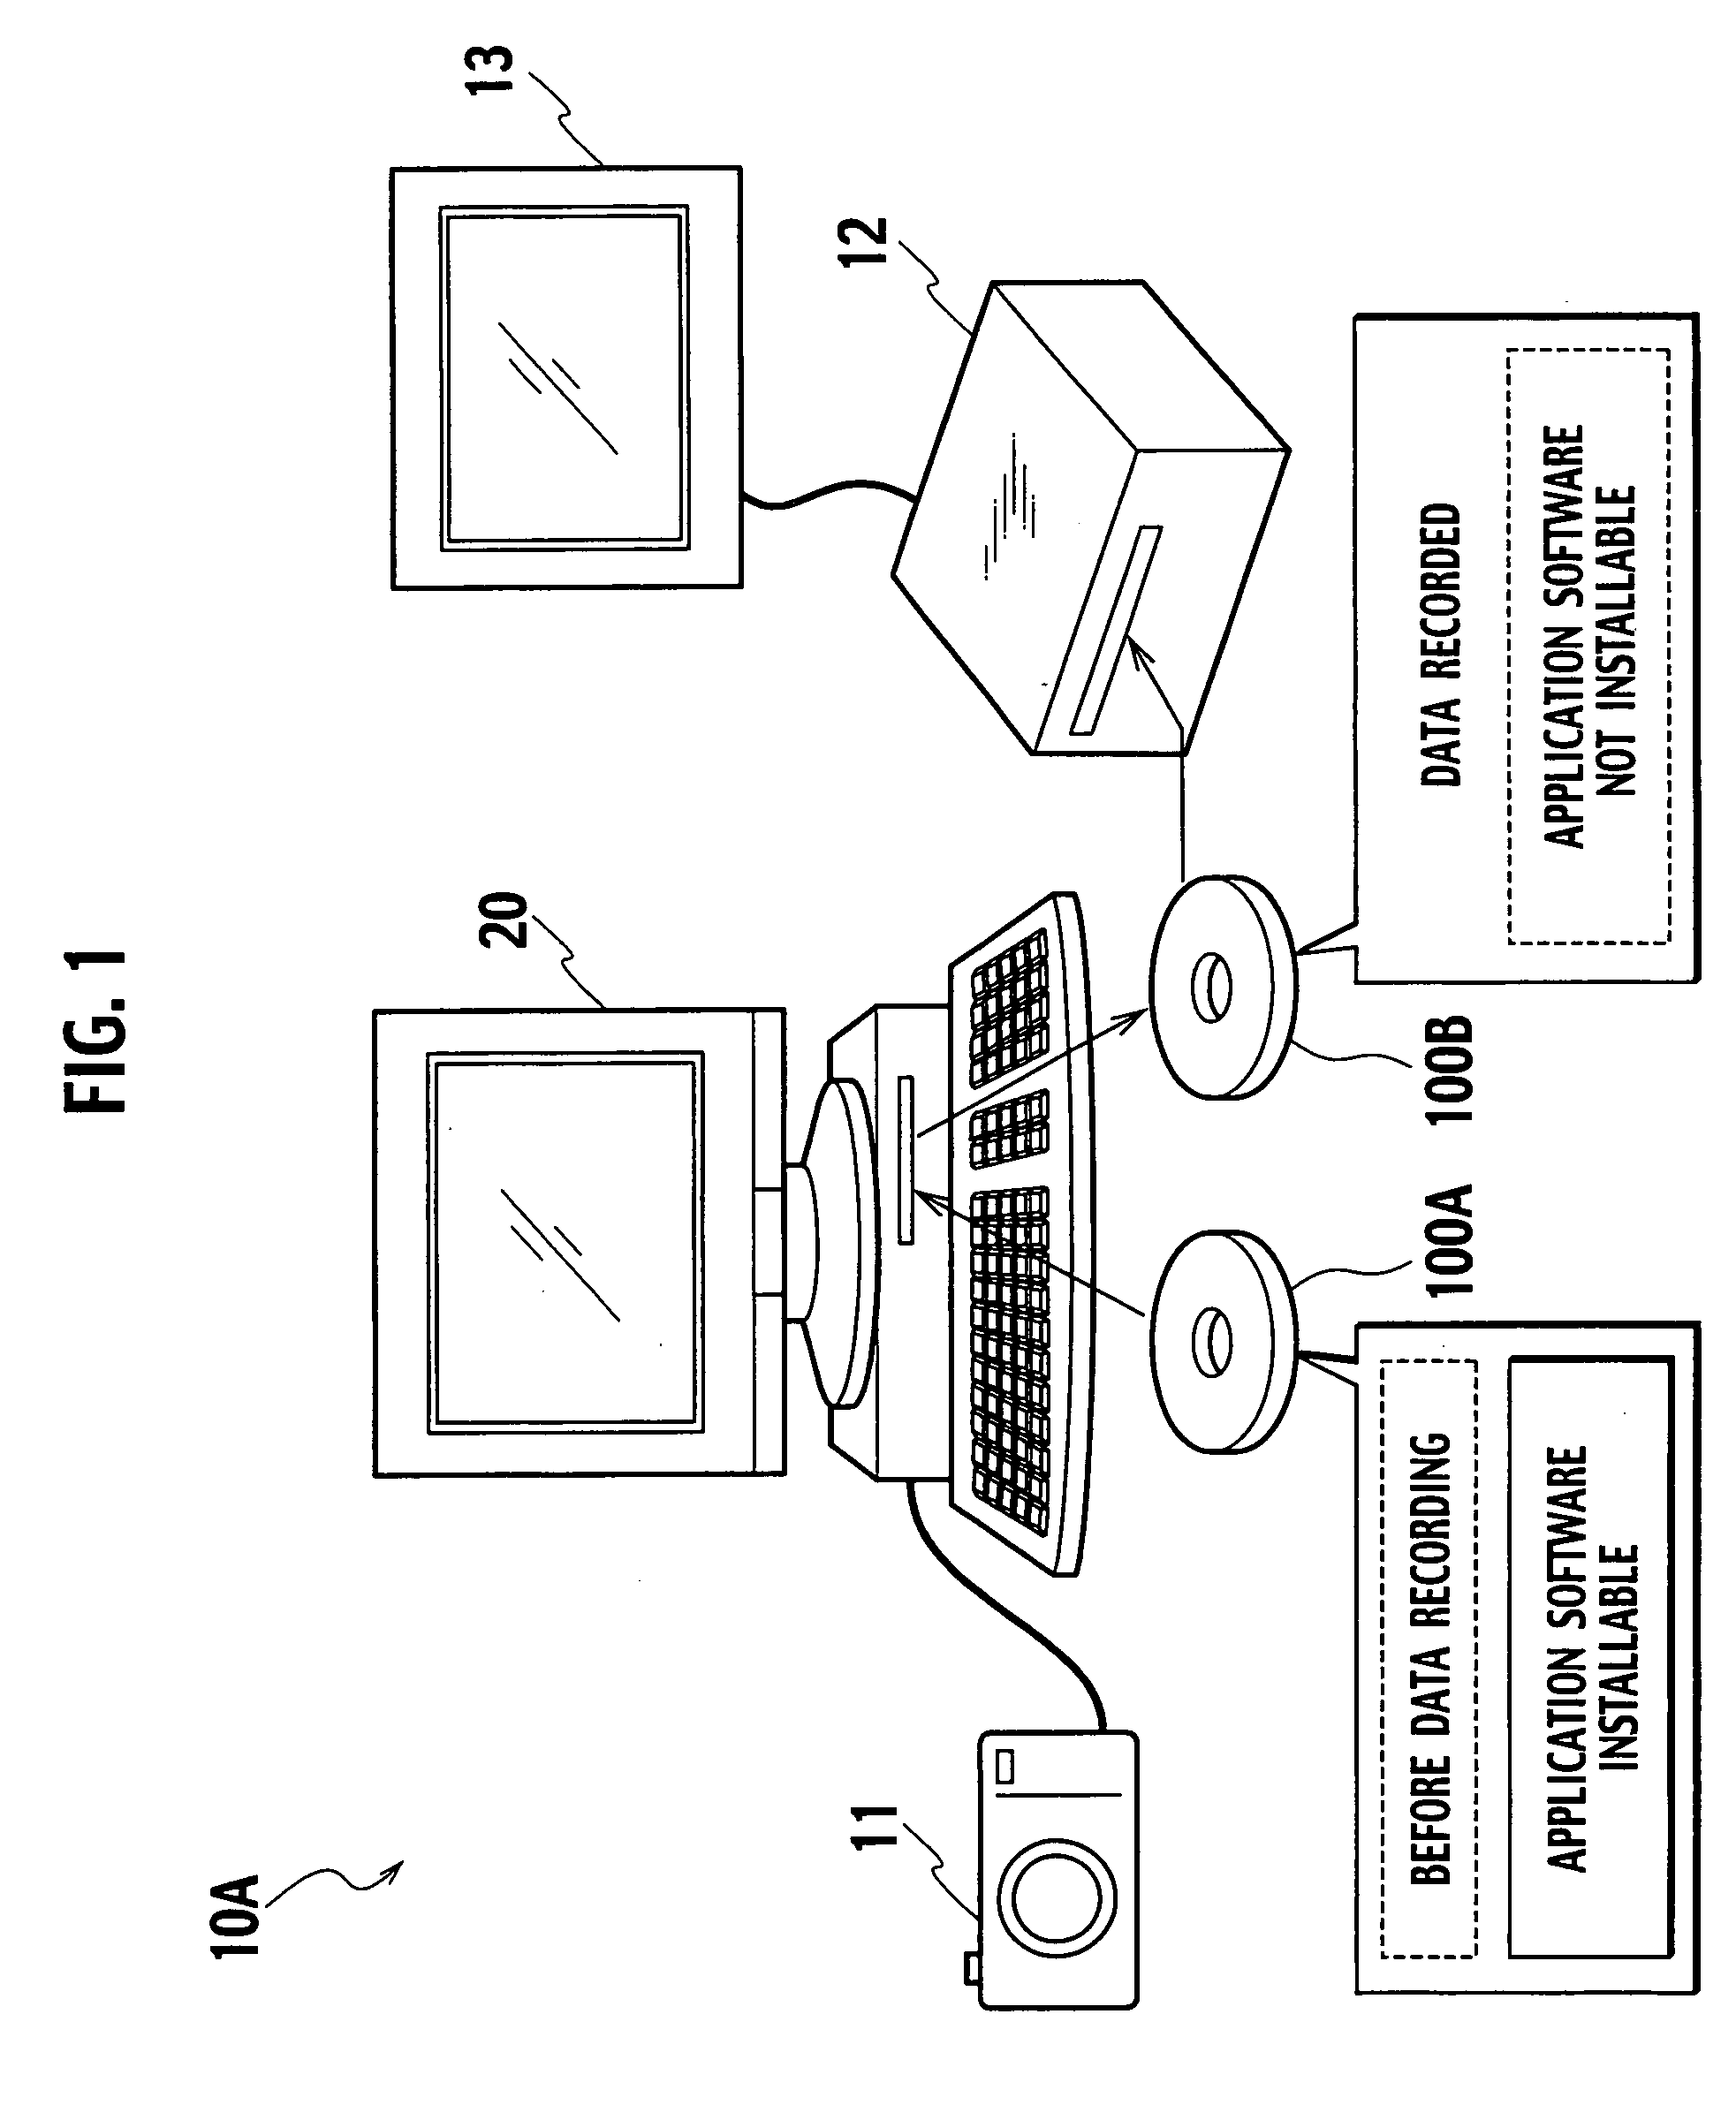 Information recording method and optical disk